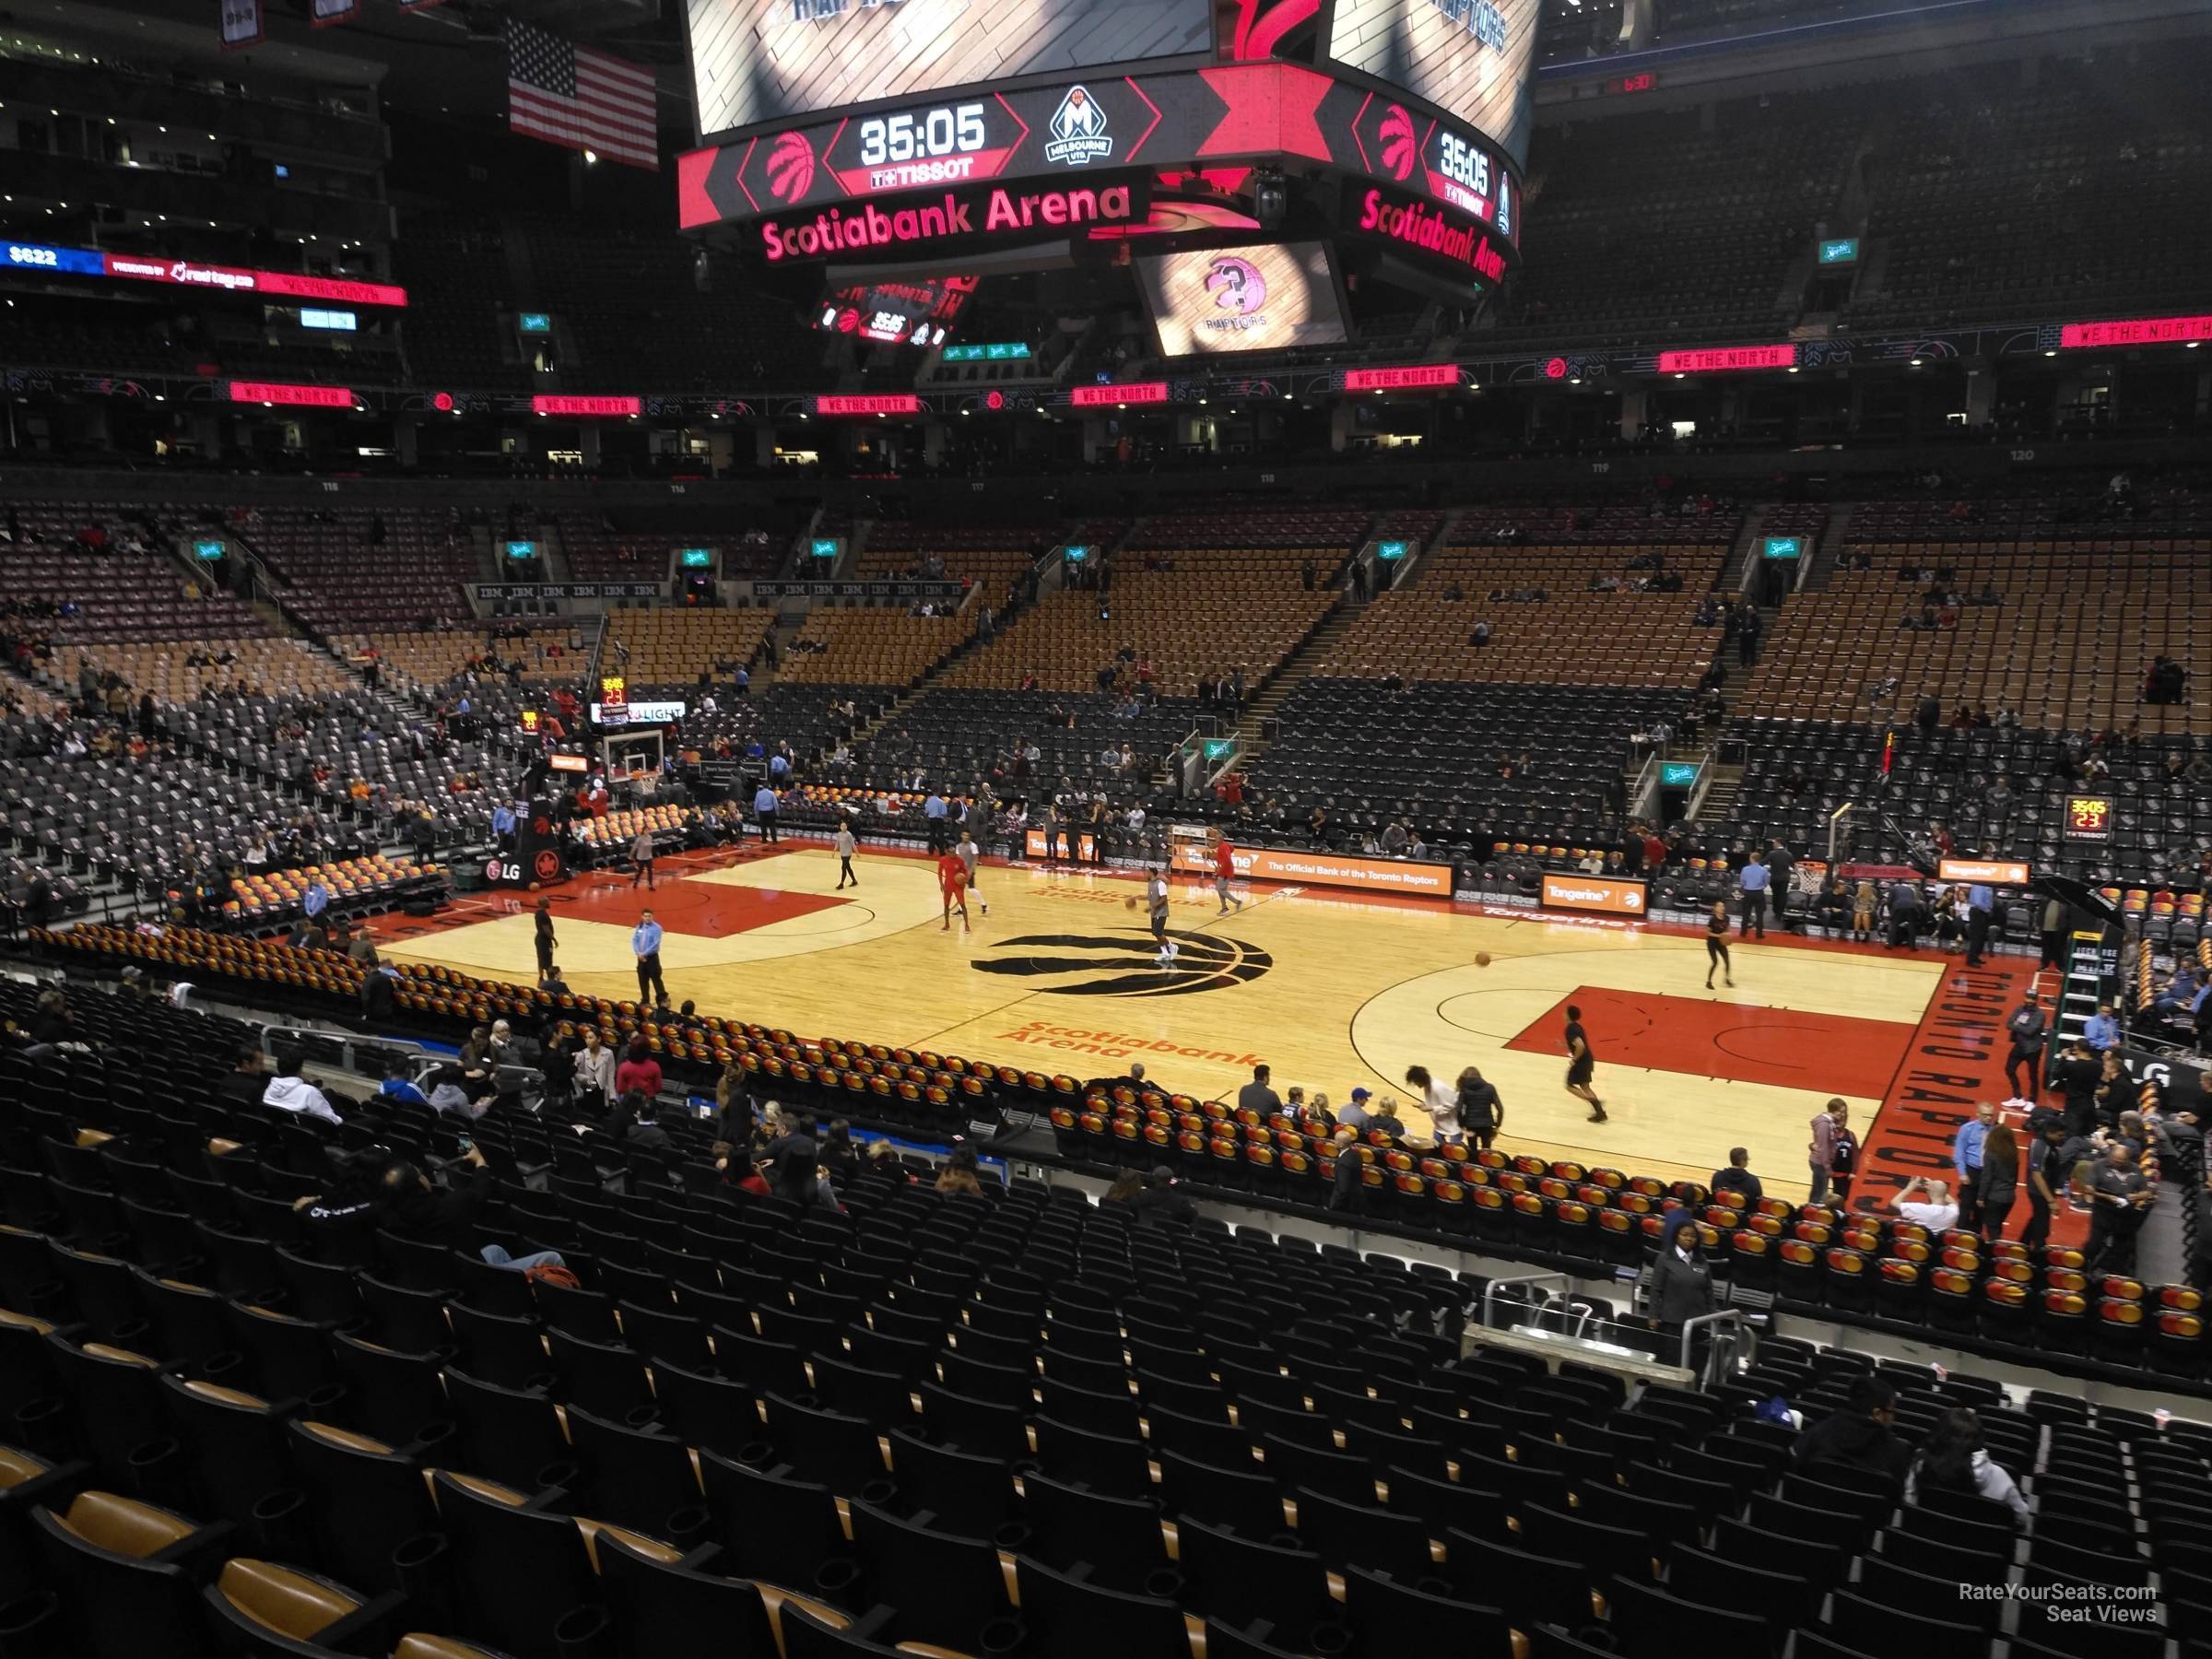 section 107, row 28 seat view  for basketball - scotiabank arena